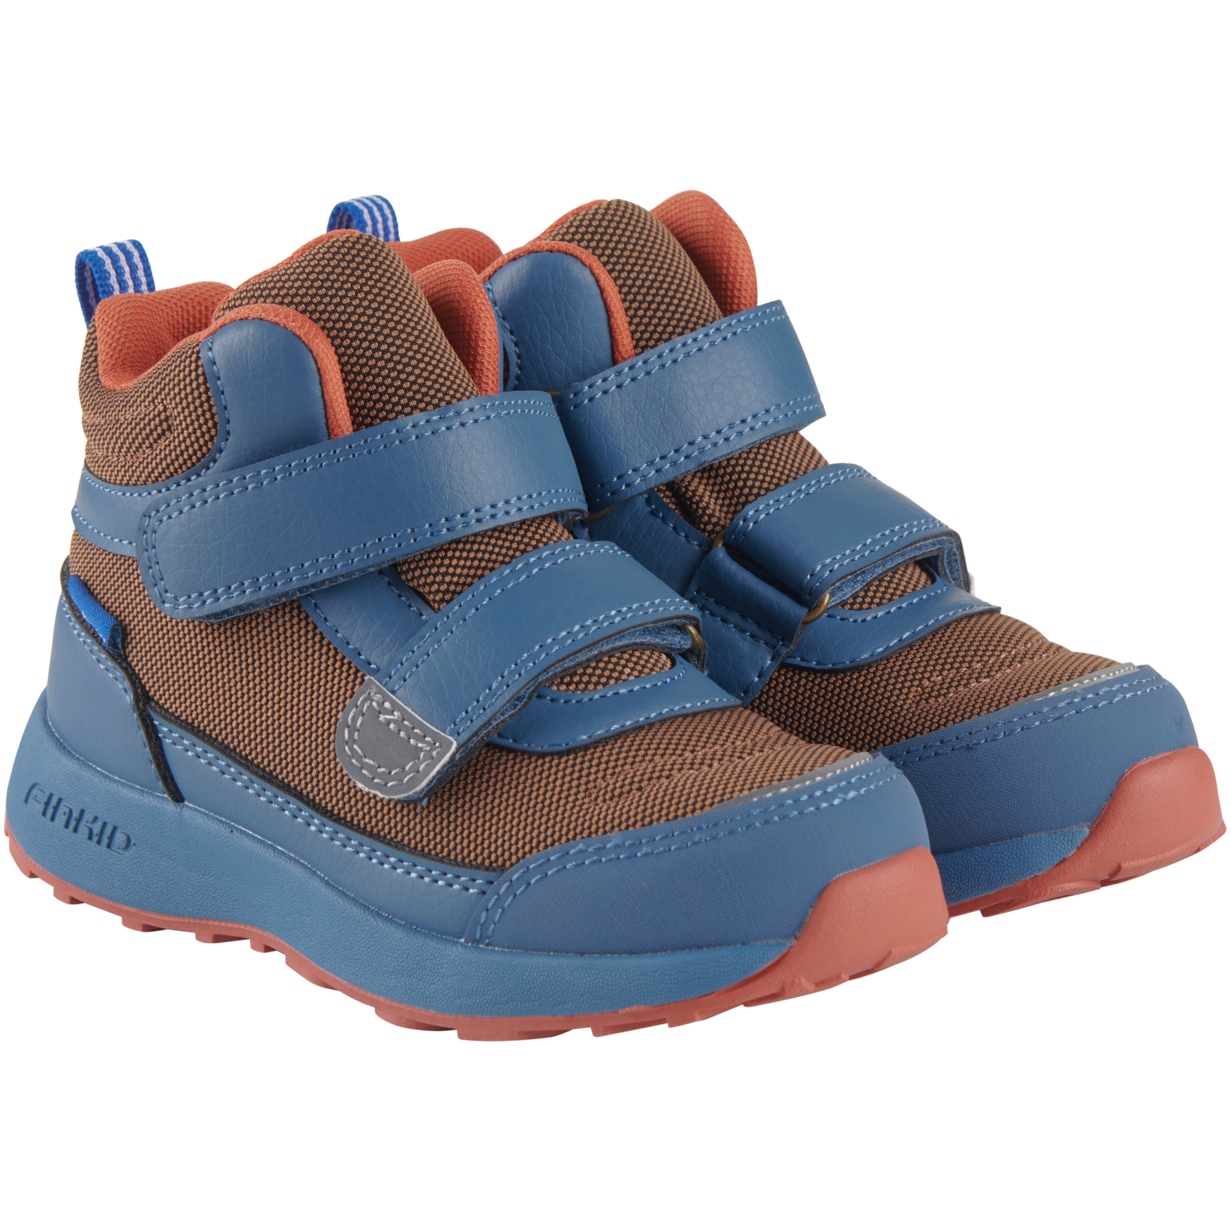 Picture of Finkid SOMERO Outdoor Shoes - Kids Hiking Shoes - almond/real teal